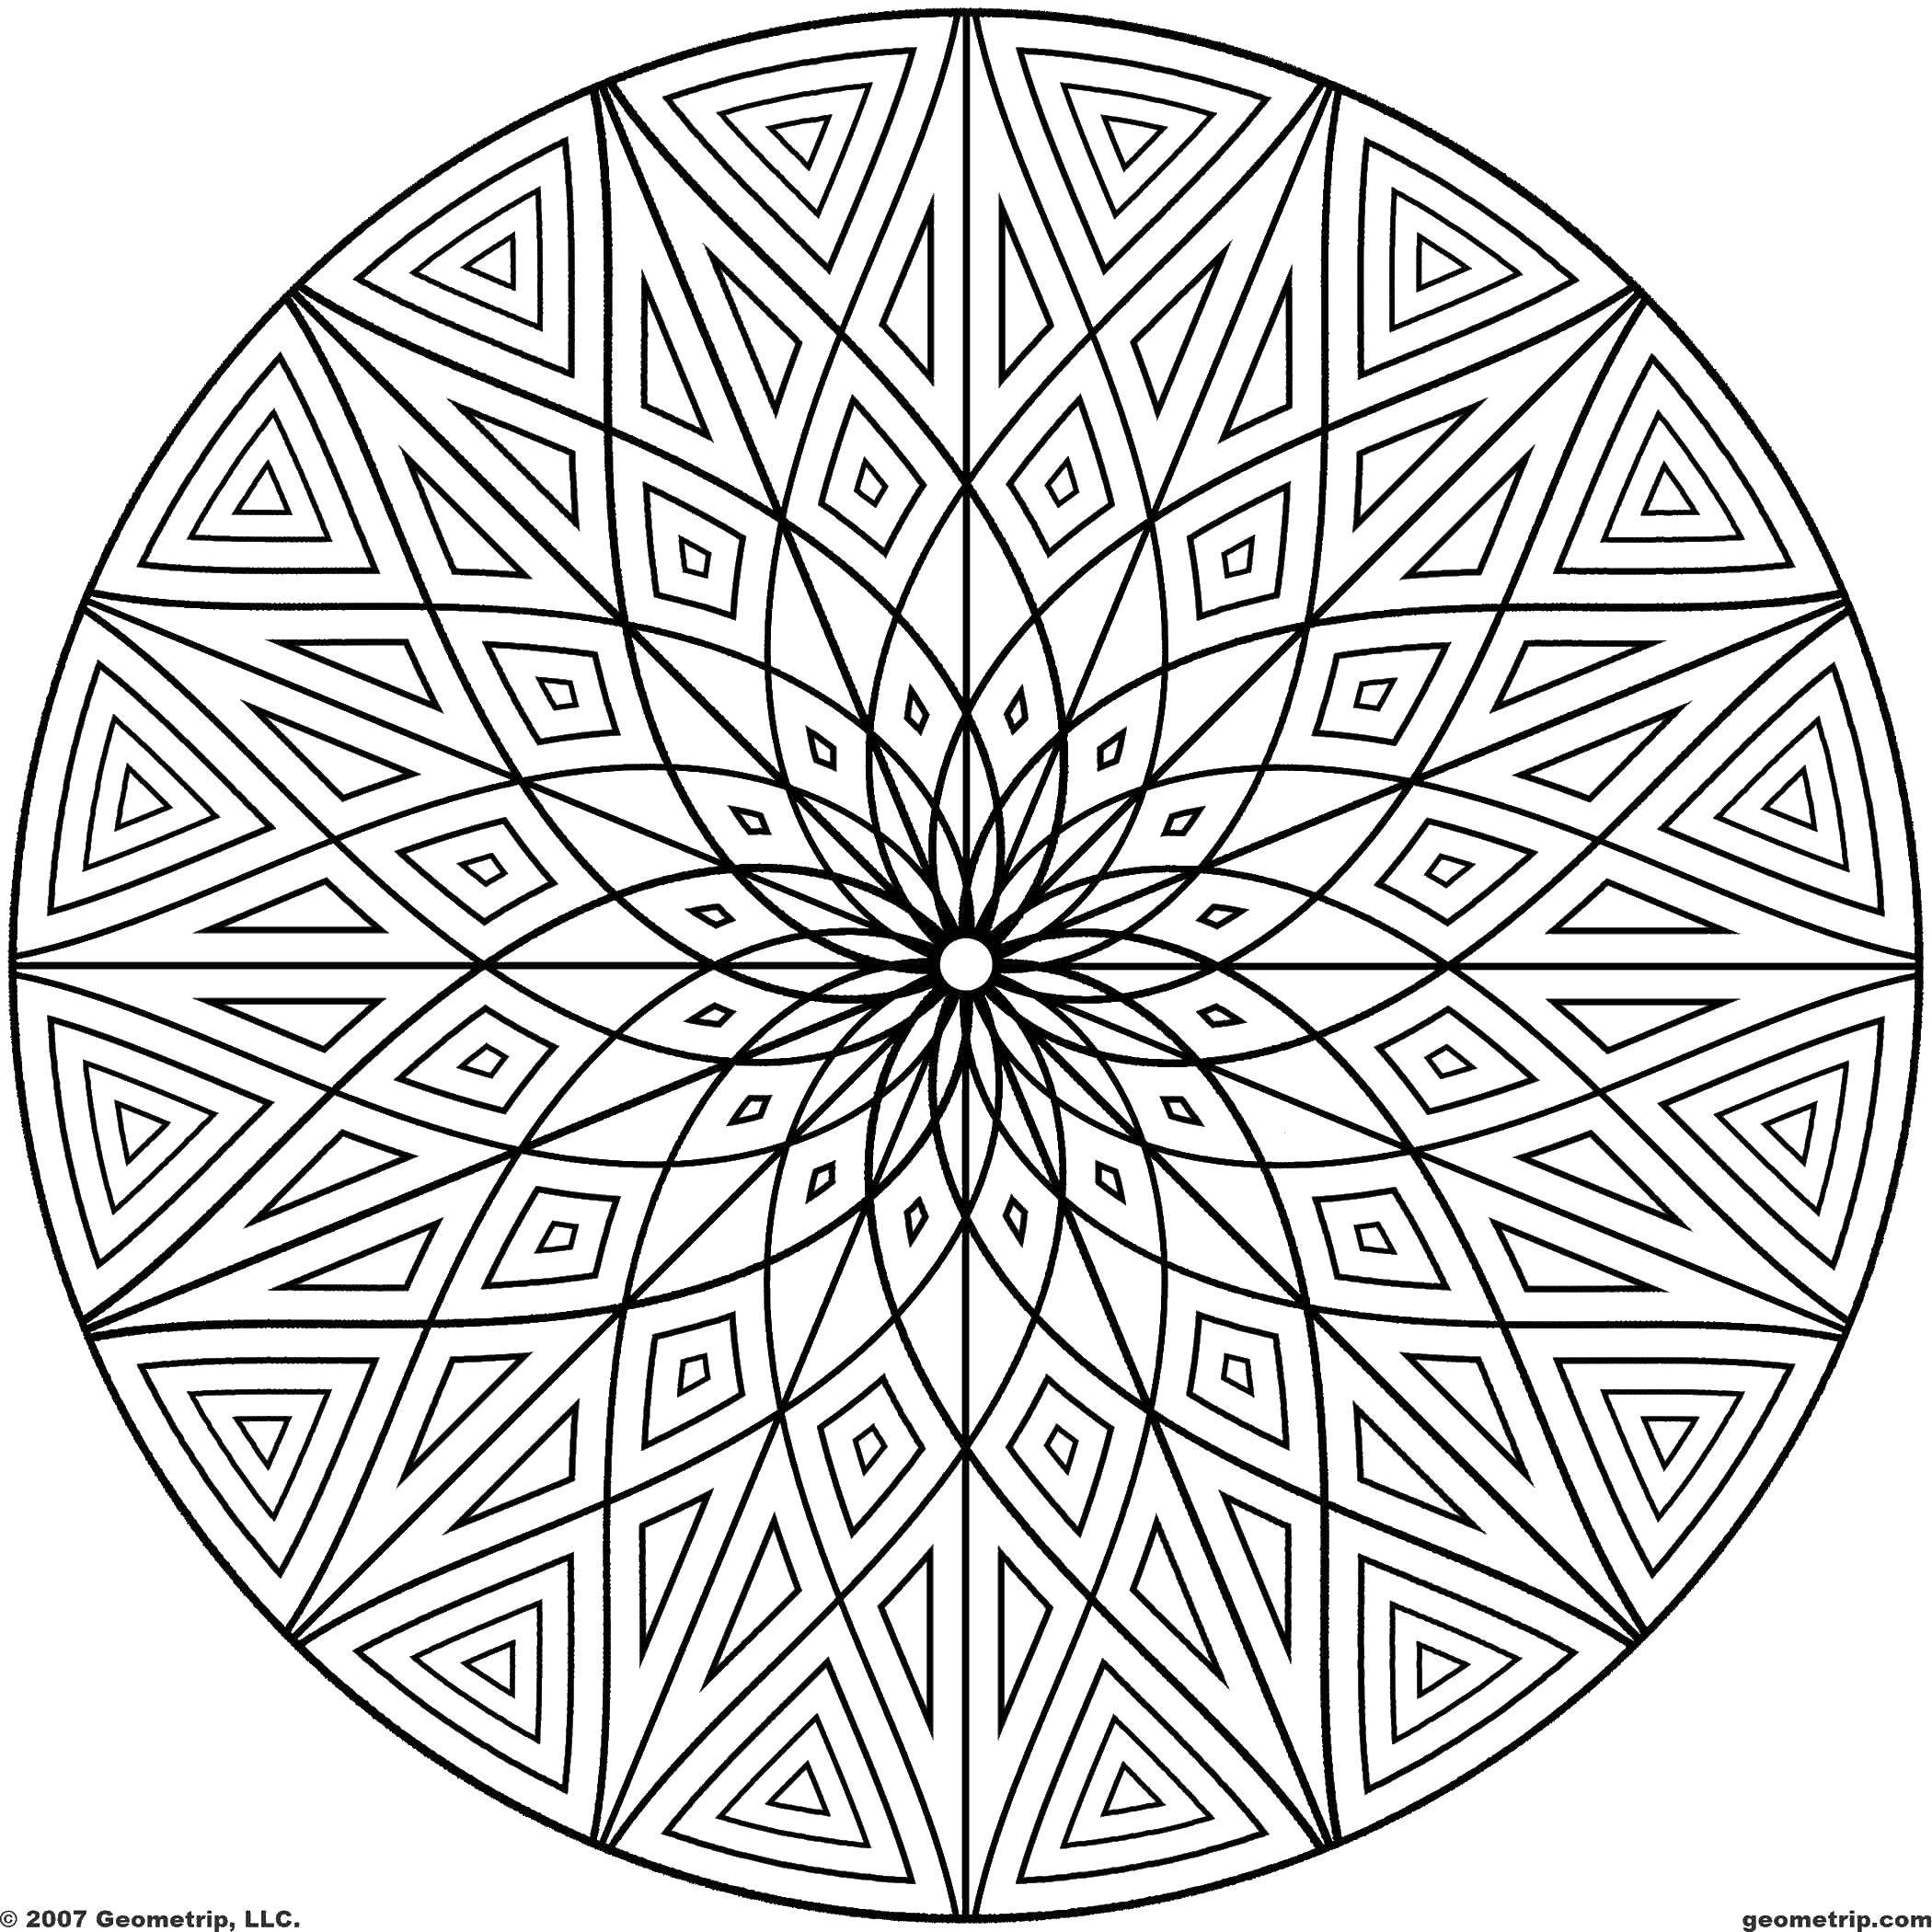 Coloring A circle with patterns inside. Category Sophisticated design. Tags:  Patterns, geometric.